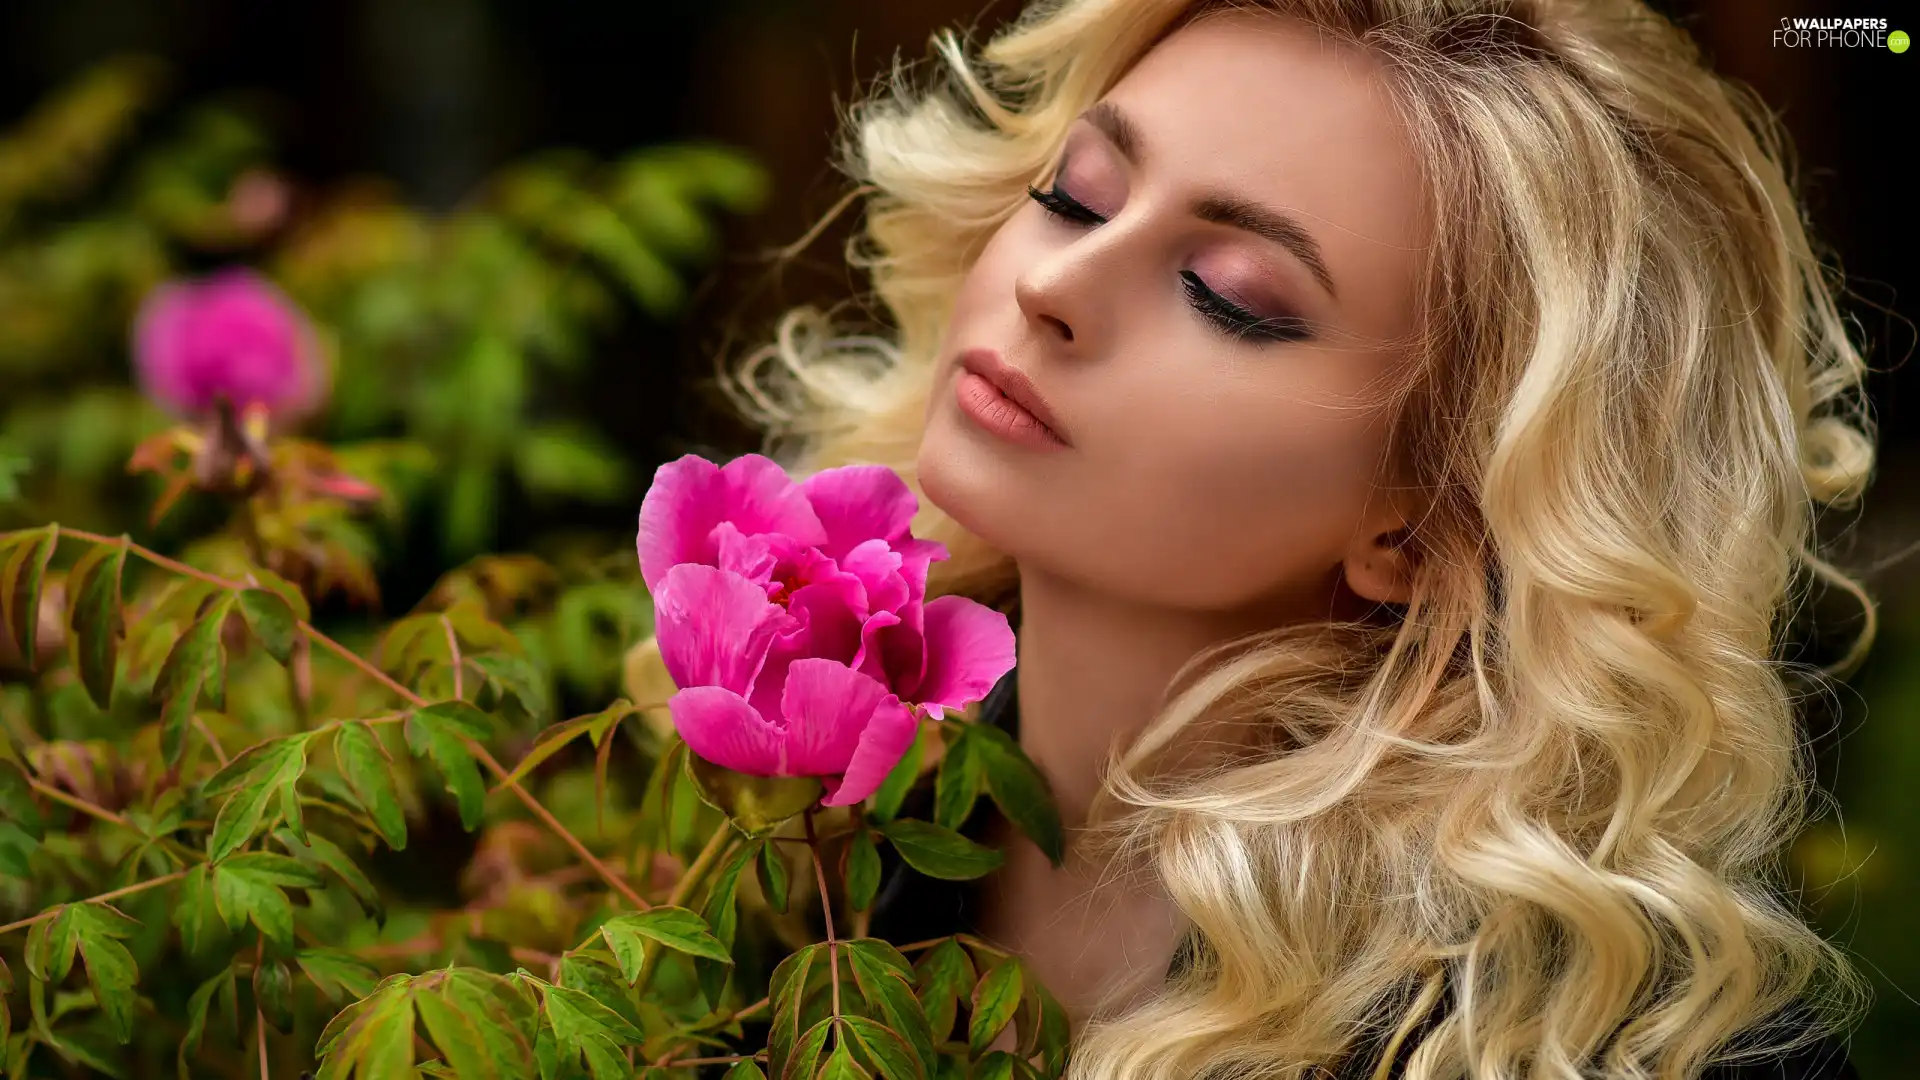 Women, Pink, Colourfull Flowers, Blonde